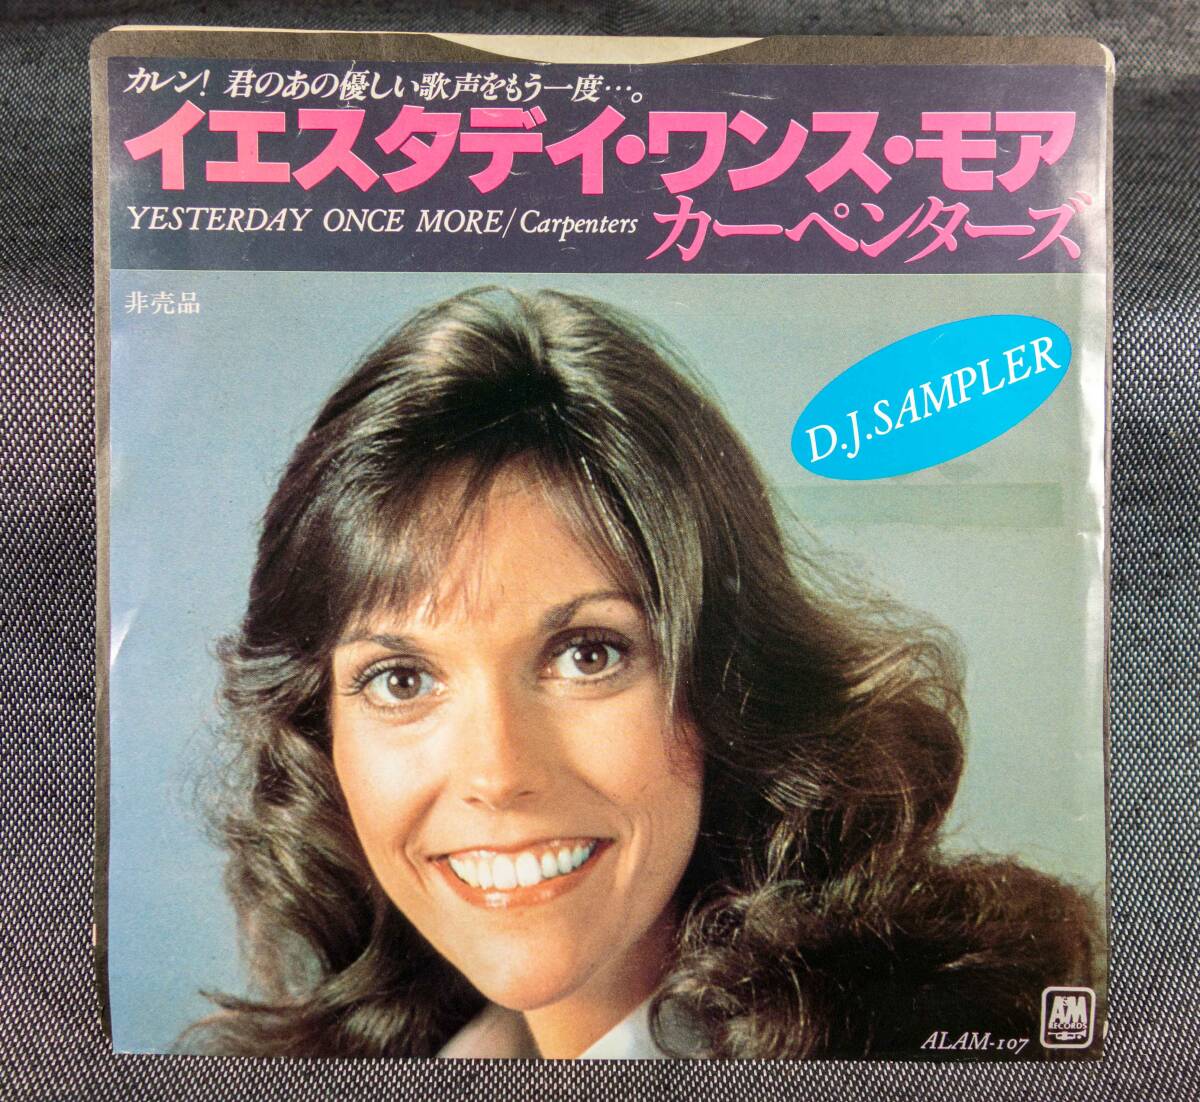 CARPENTERS カーペンターズ YESTERDAY ONCE MORE 日本盤 W/L PROMO 7inch SINGLE [A&M RECORDS ALAM-107]の画像1